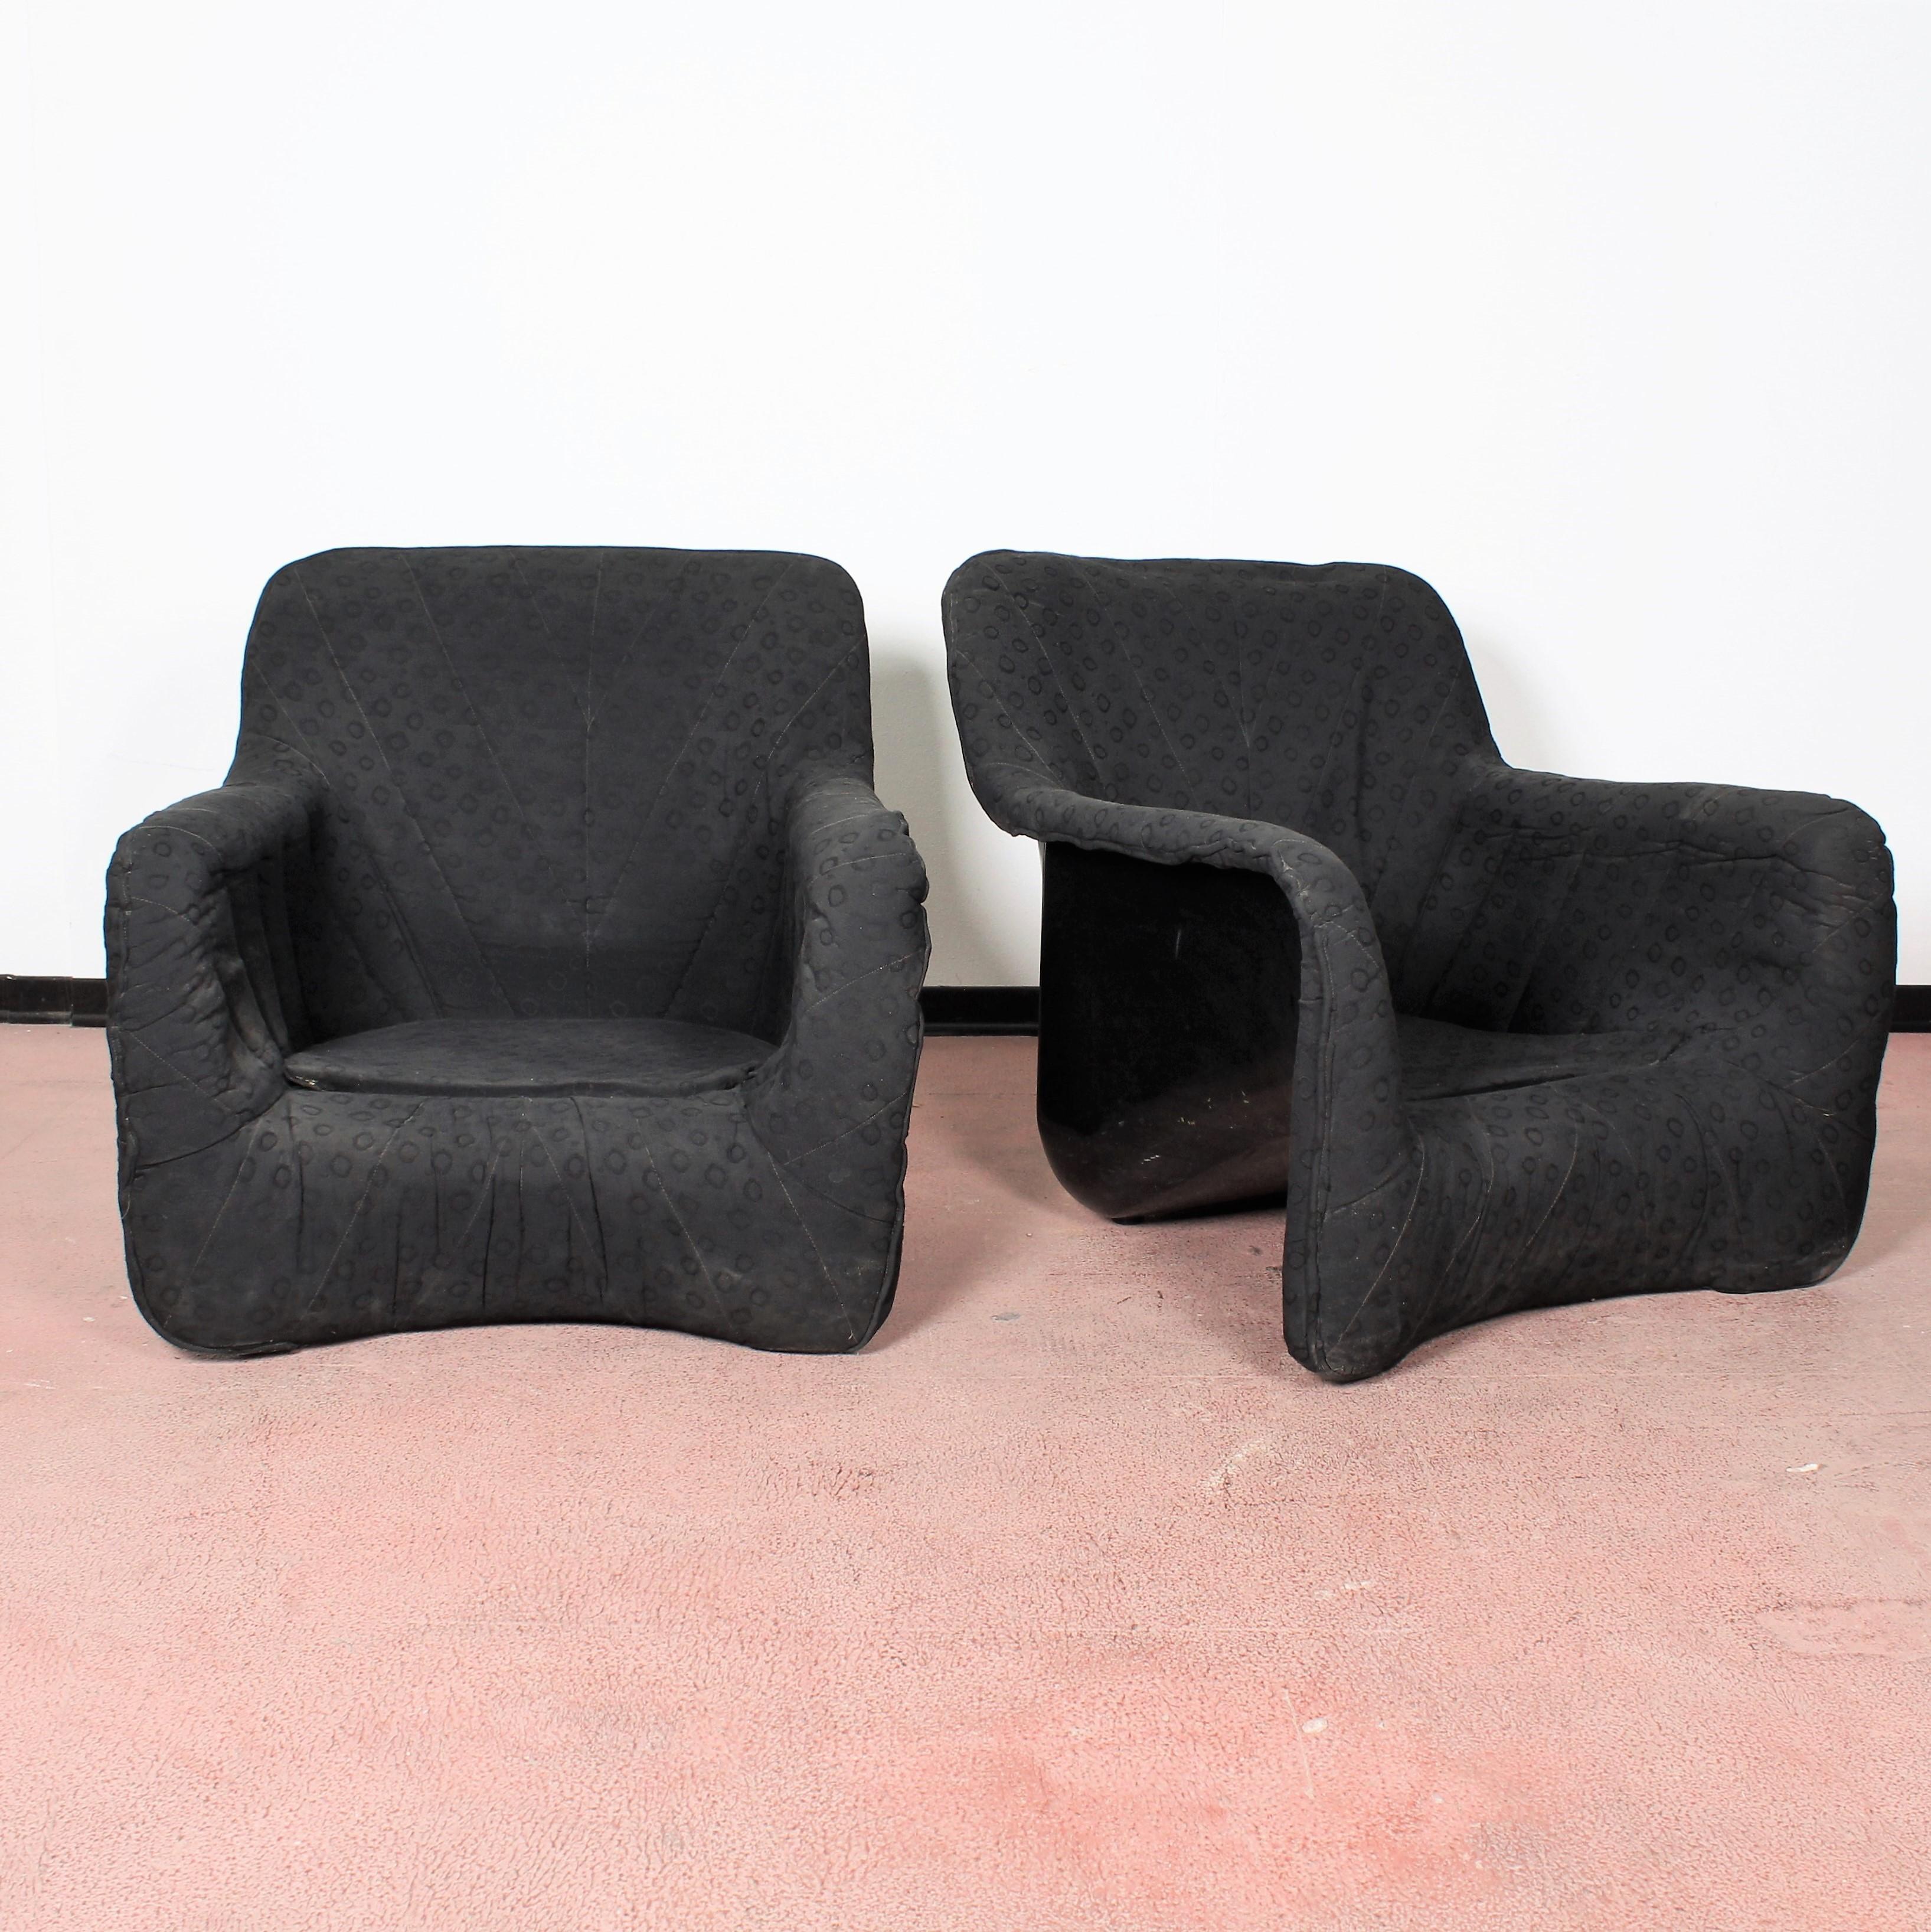 Pair of Verner Panton style midcentury black fiberglass armchairs, 1970s.
Wear consistent with age and use.